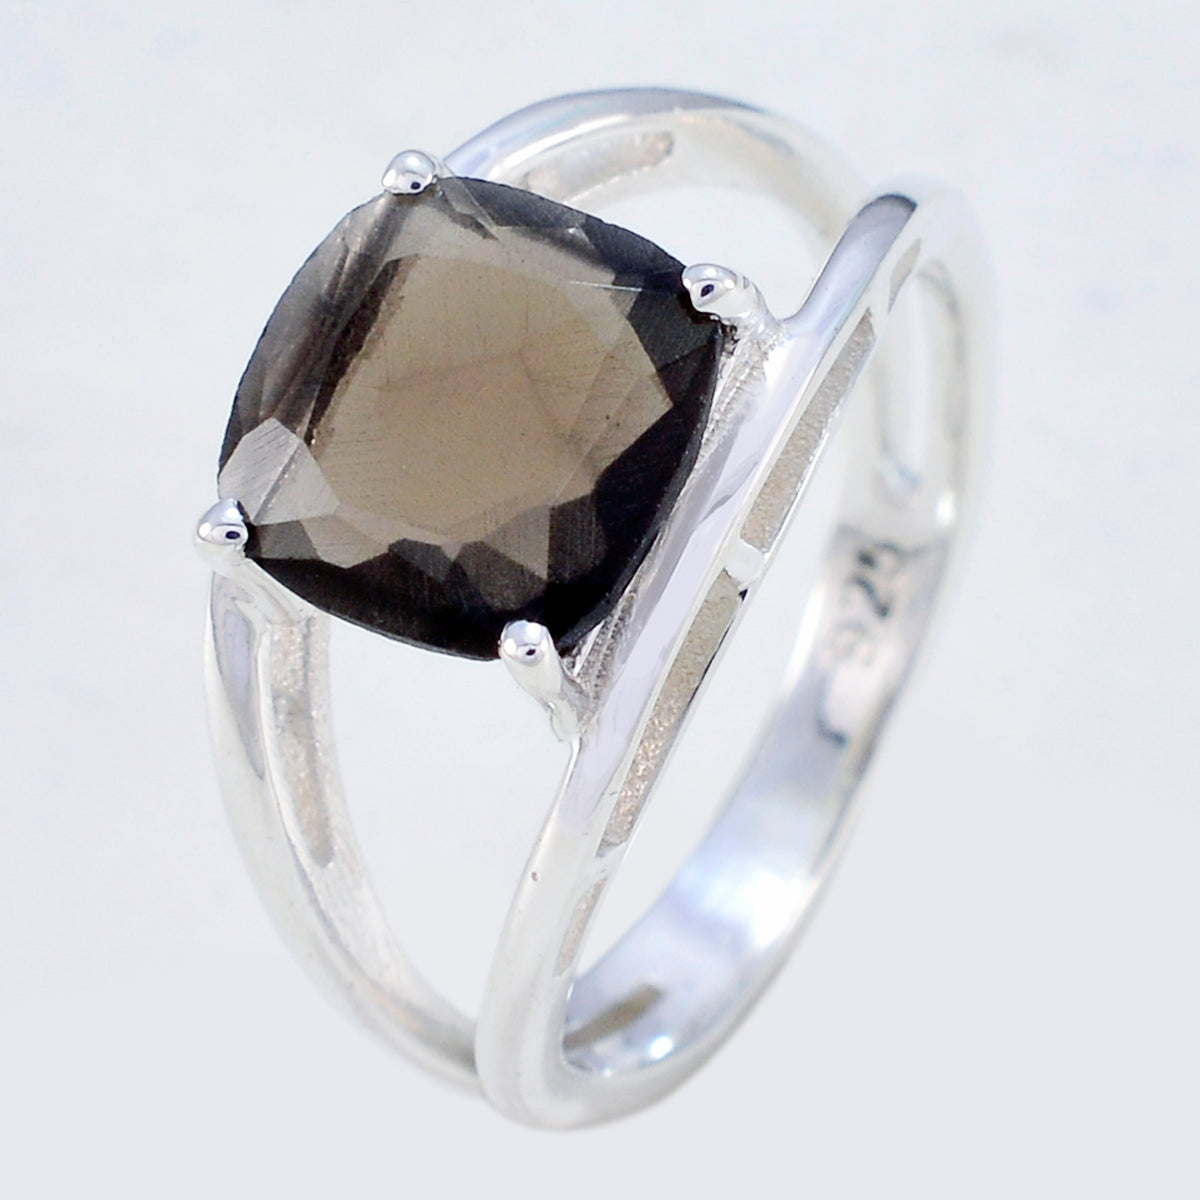 Inviting Gem Smoky Quartz 925 Silver Ring Jewelry Stores In The Mall